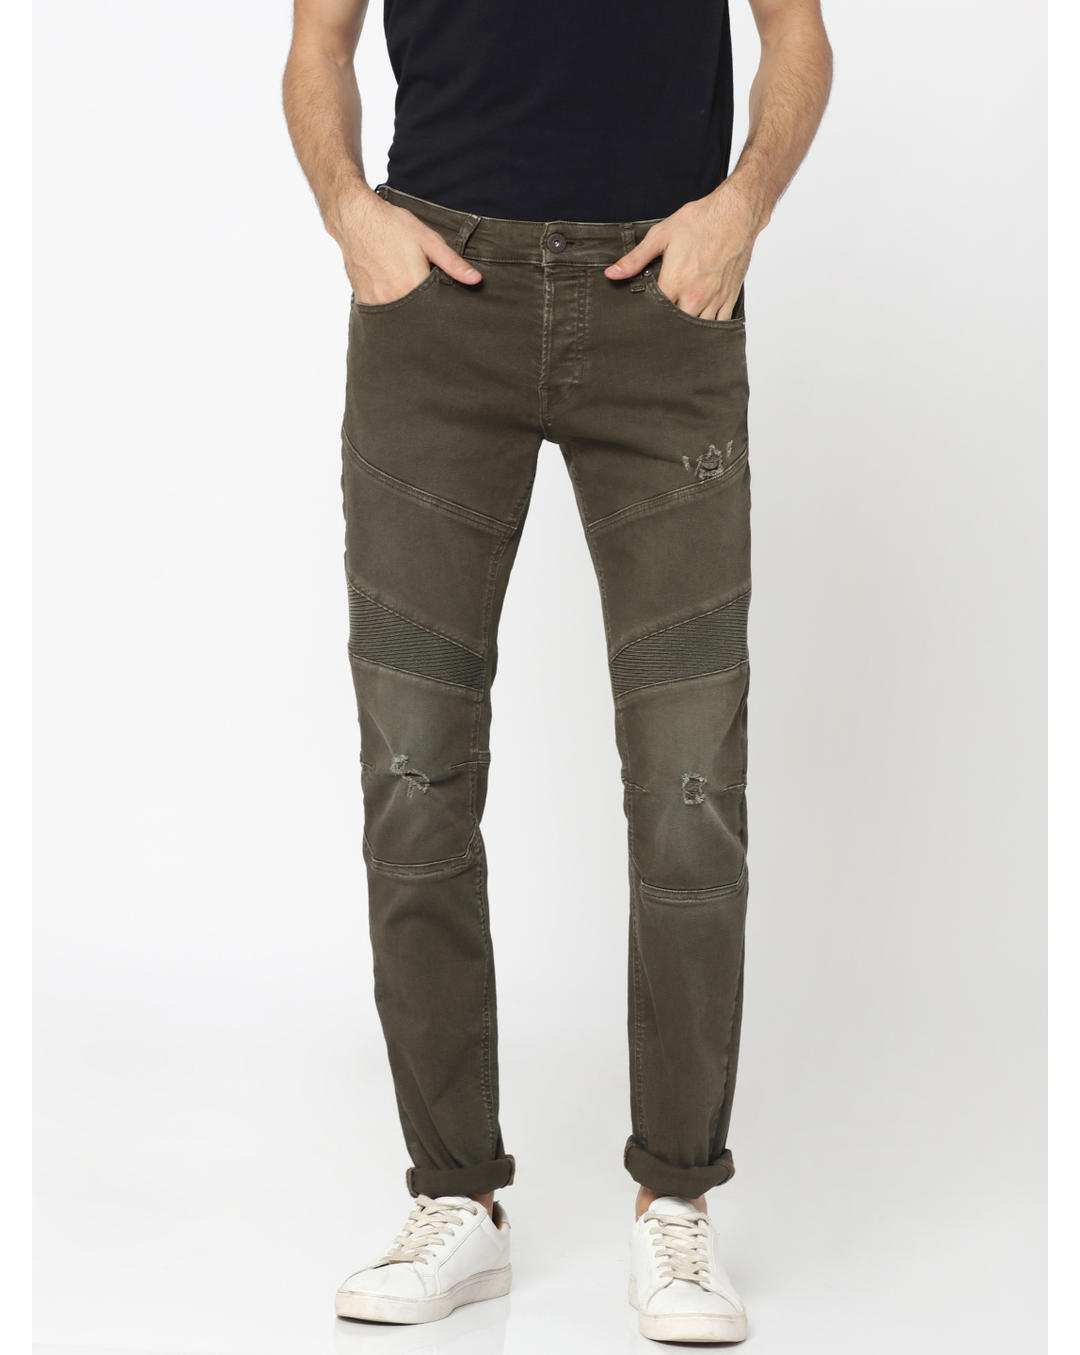 olive green ripped jeans mens